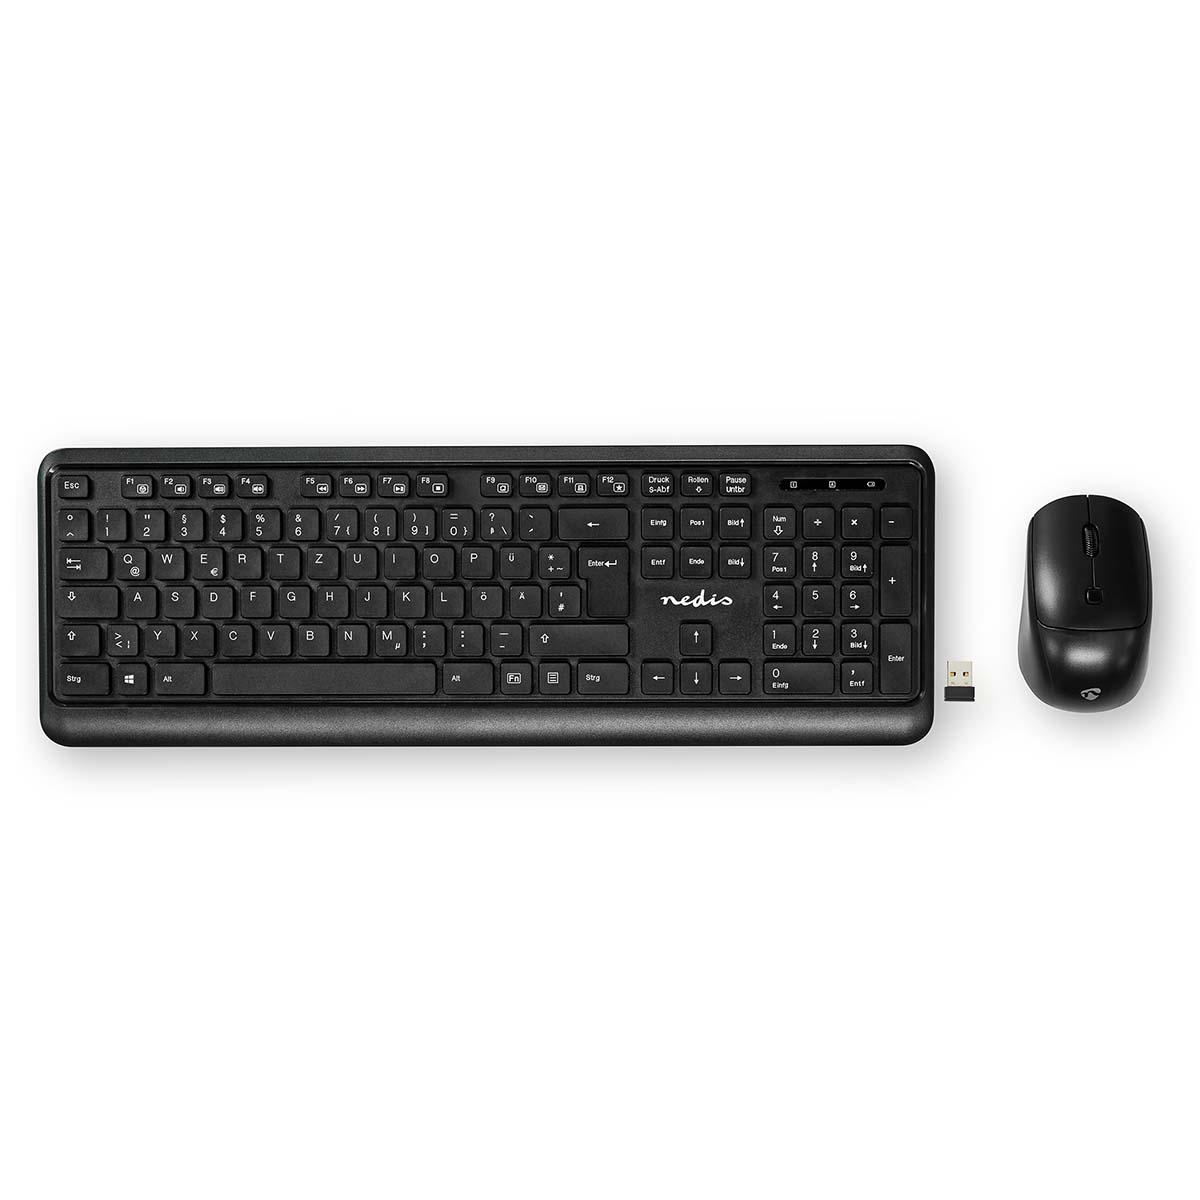 mouse-and-keyboard-set-wireless-mouse-and-keyboard-connection-usb